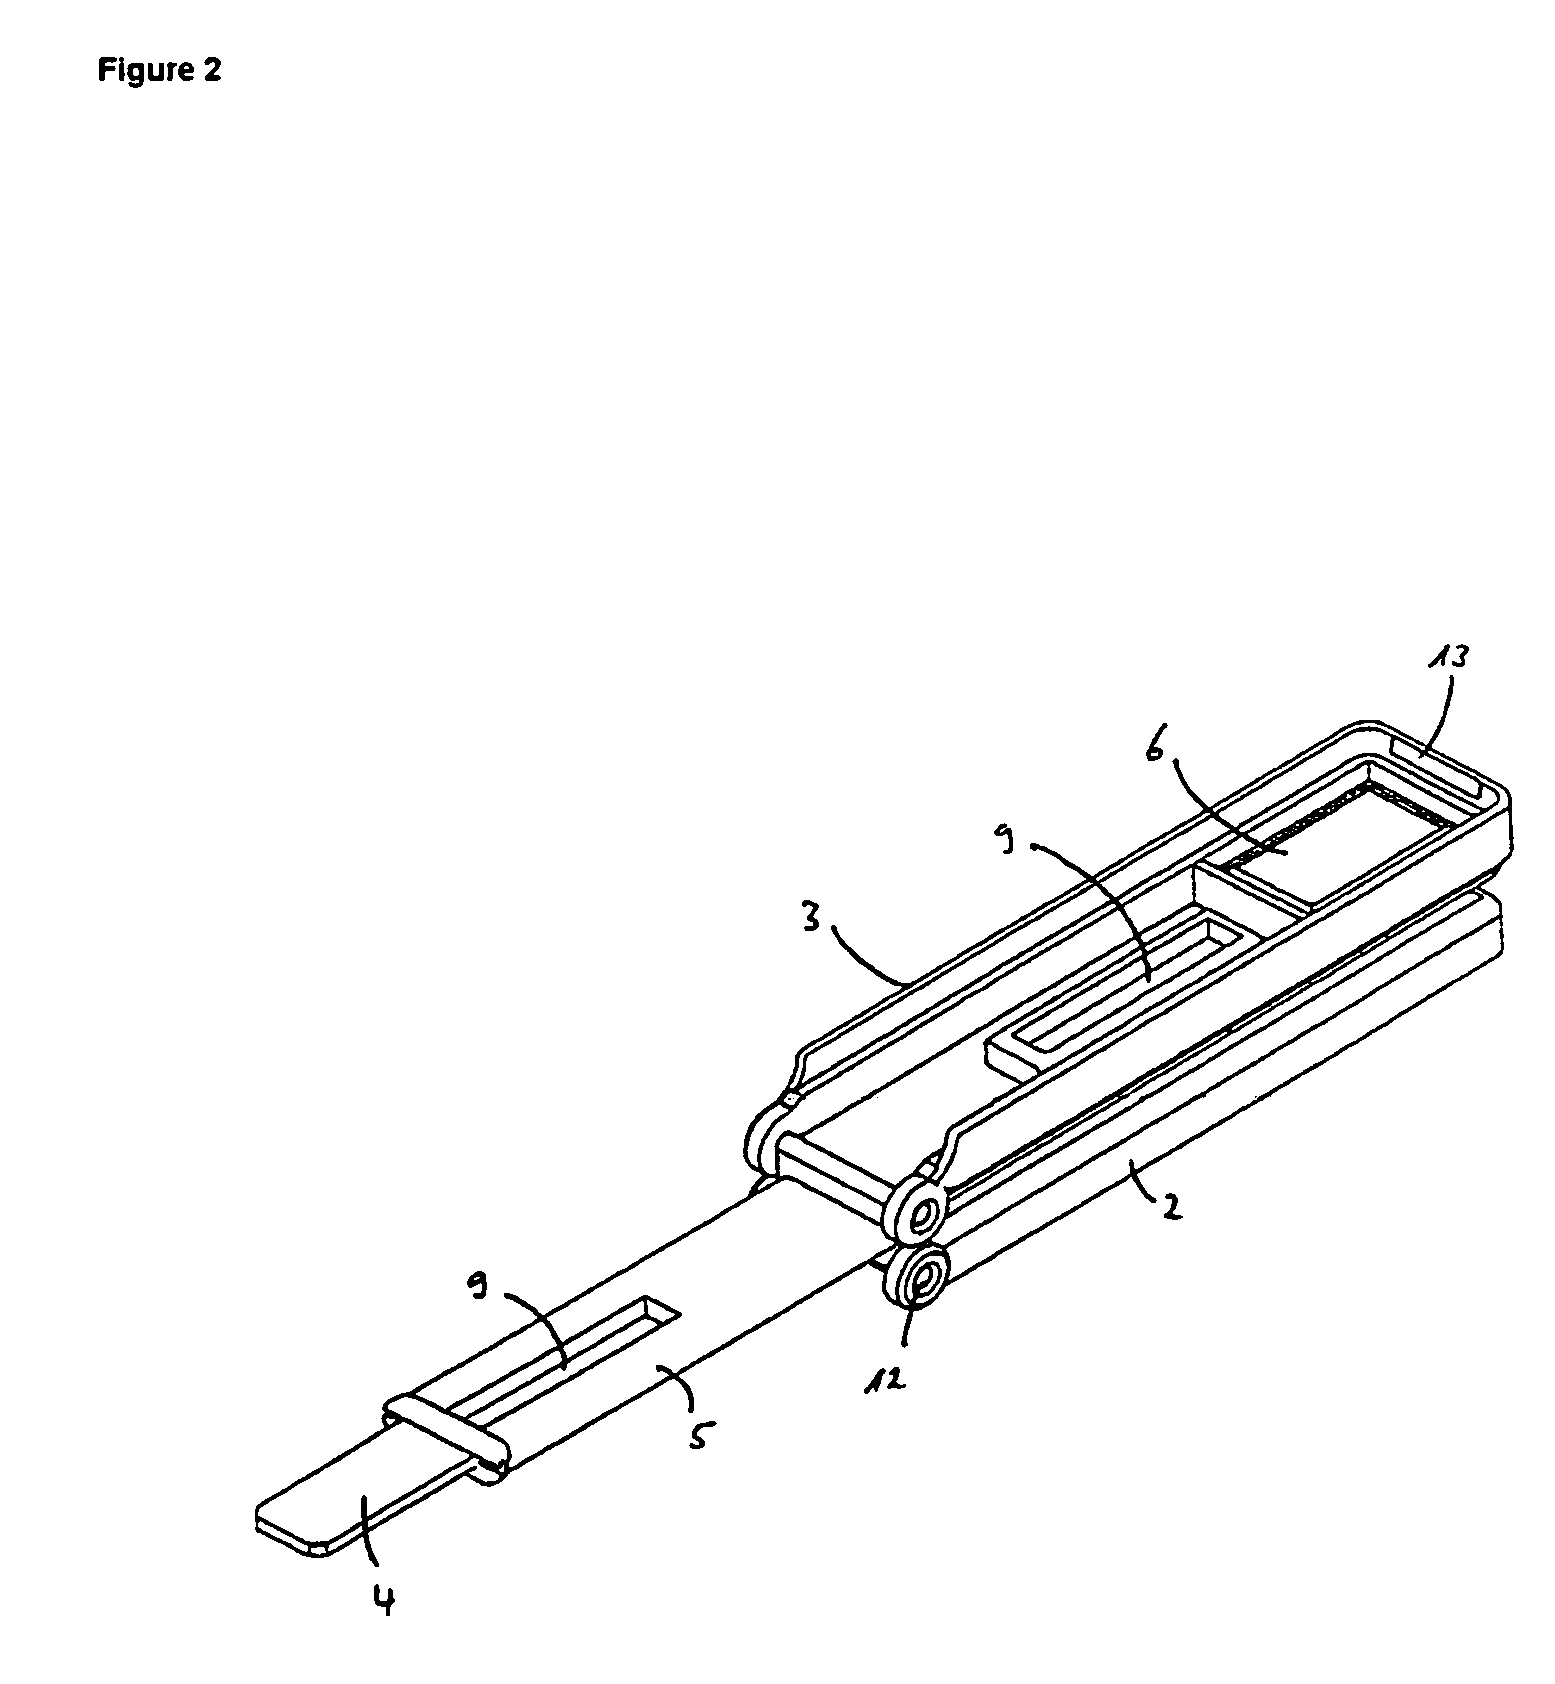 Device for collecting liquid samples